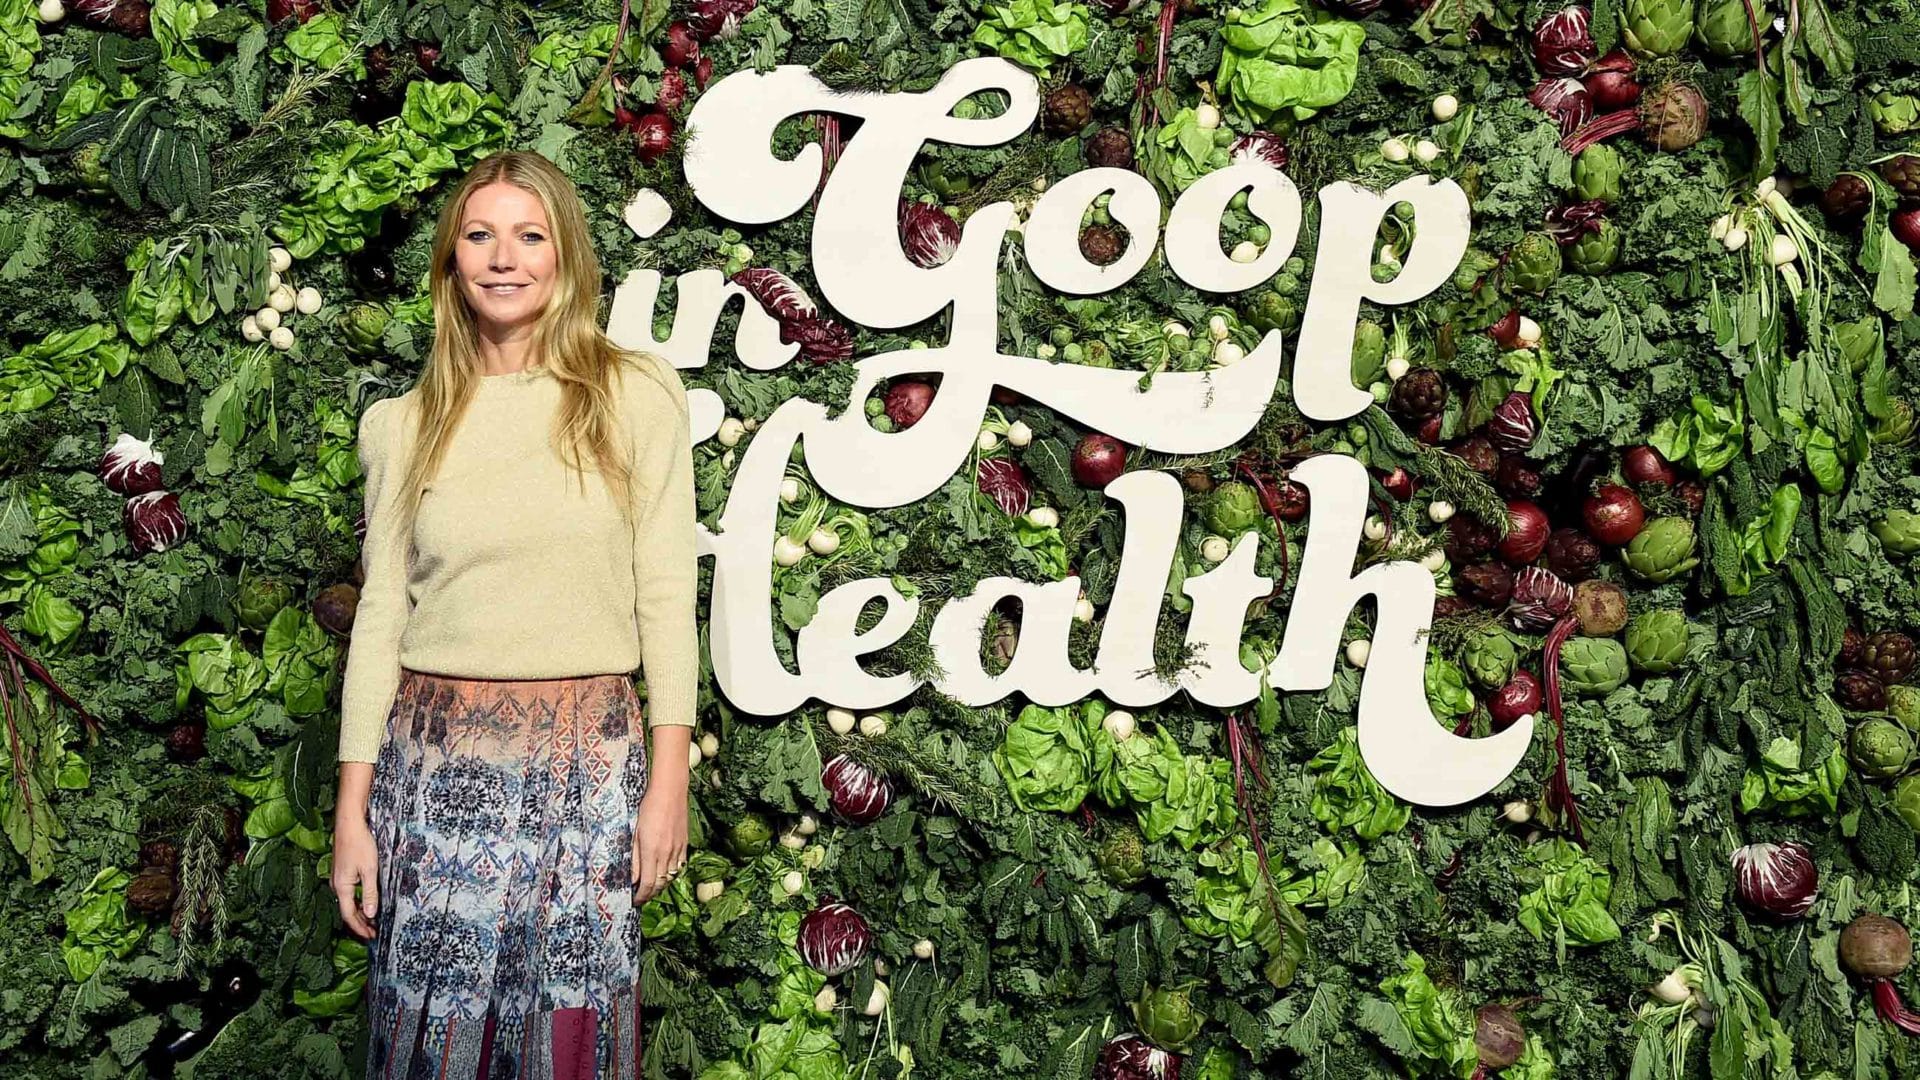 Goop, the health and  lifestyle brand launched by actor and entrepreneur Gwyneth Paltrow in 2008, will have its own series on Netflix beginning January 24.